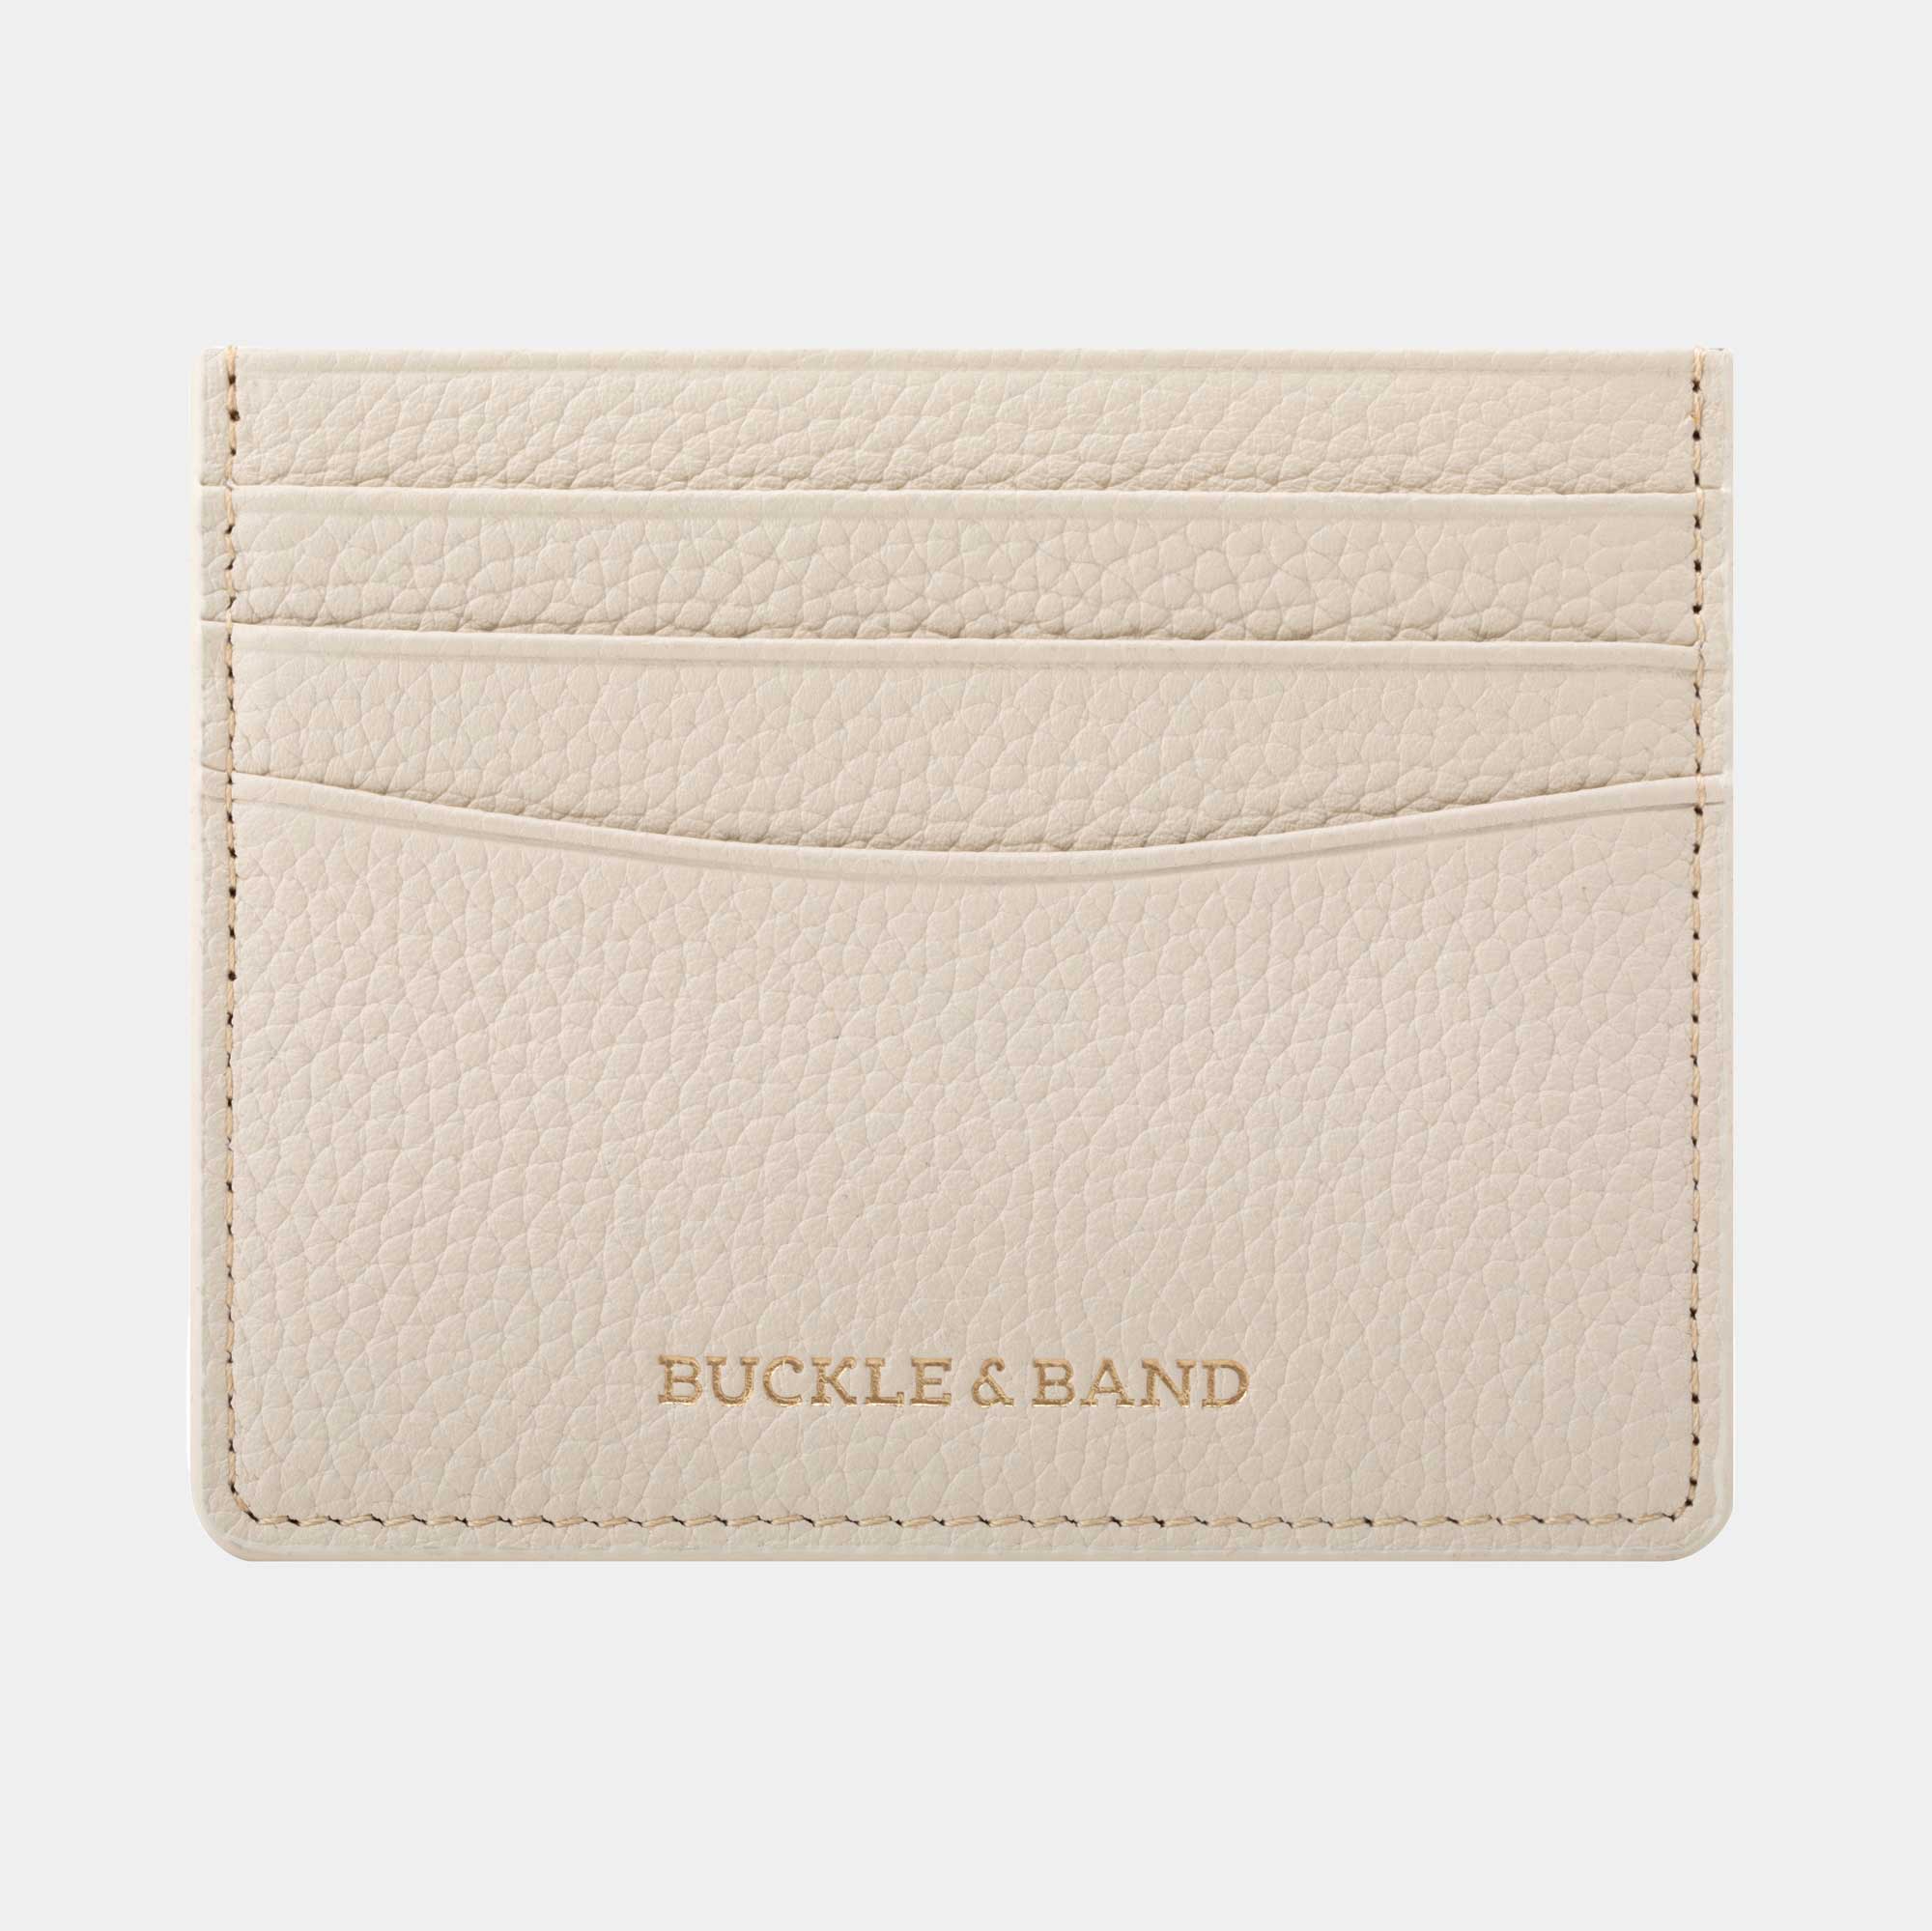 Pearl White Leather Card Wallet - Buckle and Band - CH-6-CRM-01